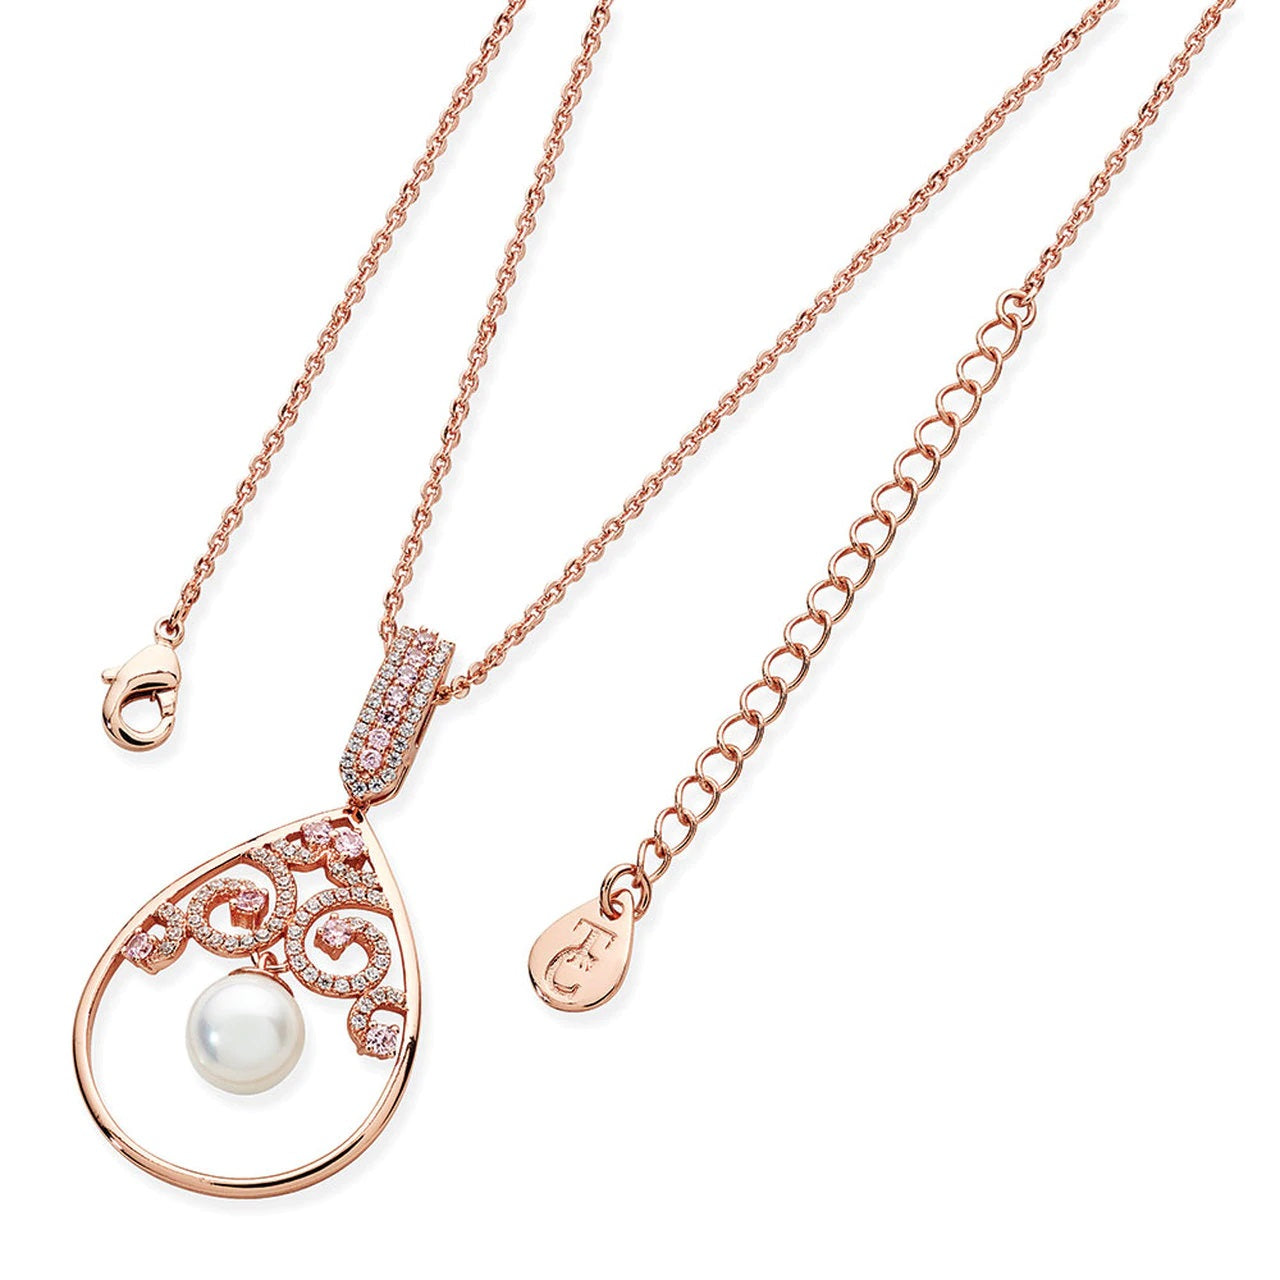 Tipperary Crystal Rose Gold Ornate Swirl Pink Cz Pendant  The most stunning pendant in our collection yet. Suspending from a crystal lined bale a stunning tear-drop shaped frame encapsulates a beautiful swirl design of pink crystals. Suspending from this is an 8mm light pink shell pearl, this suspends from a rose gold cable chain that secures safely with a lobster claw clasp and a TC branded fob.